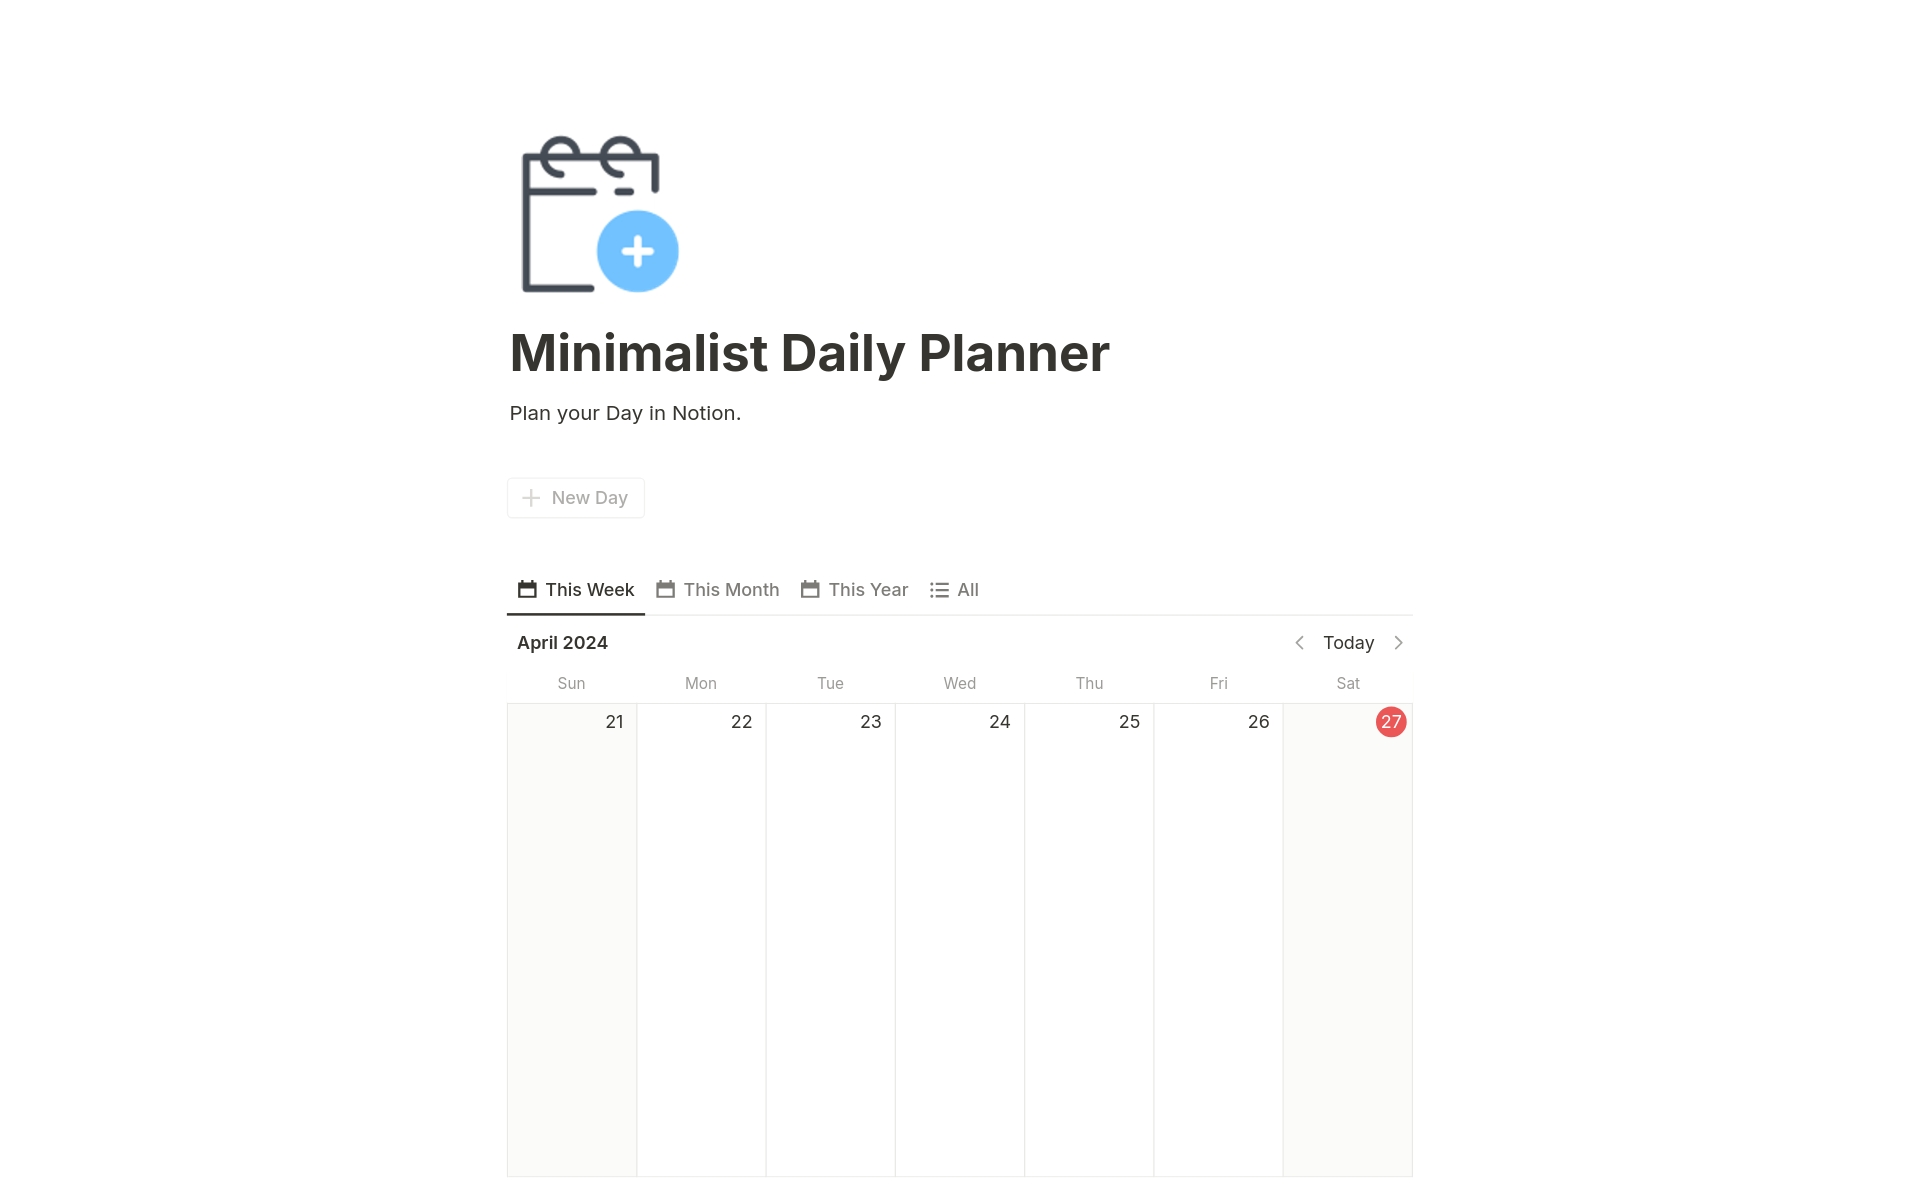 Say goodbye to cluttered interfaces and complex systems – our template offers a sleek, intuitive design that focuses solely on your daily essentials.